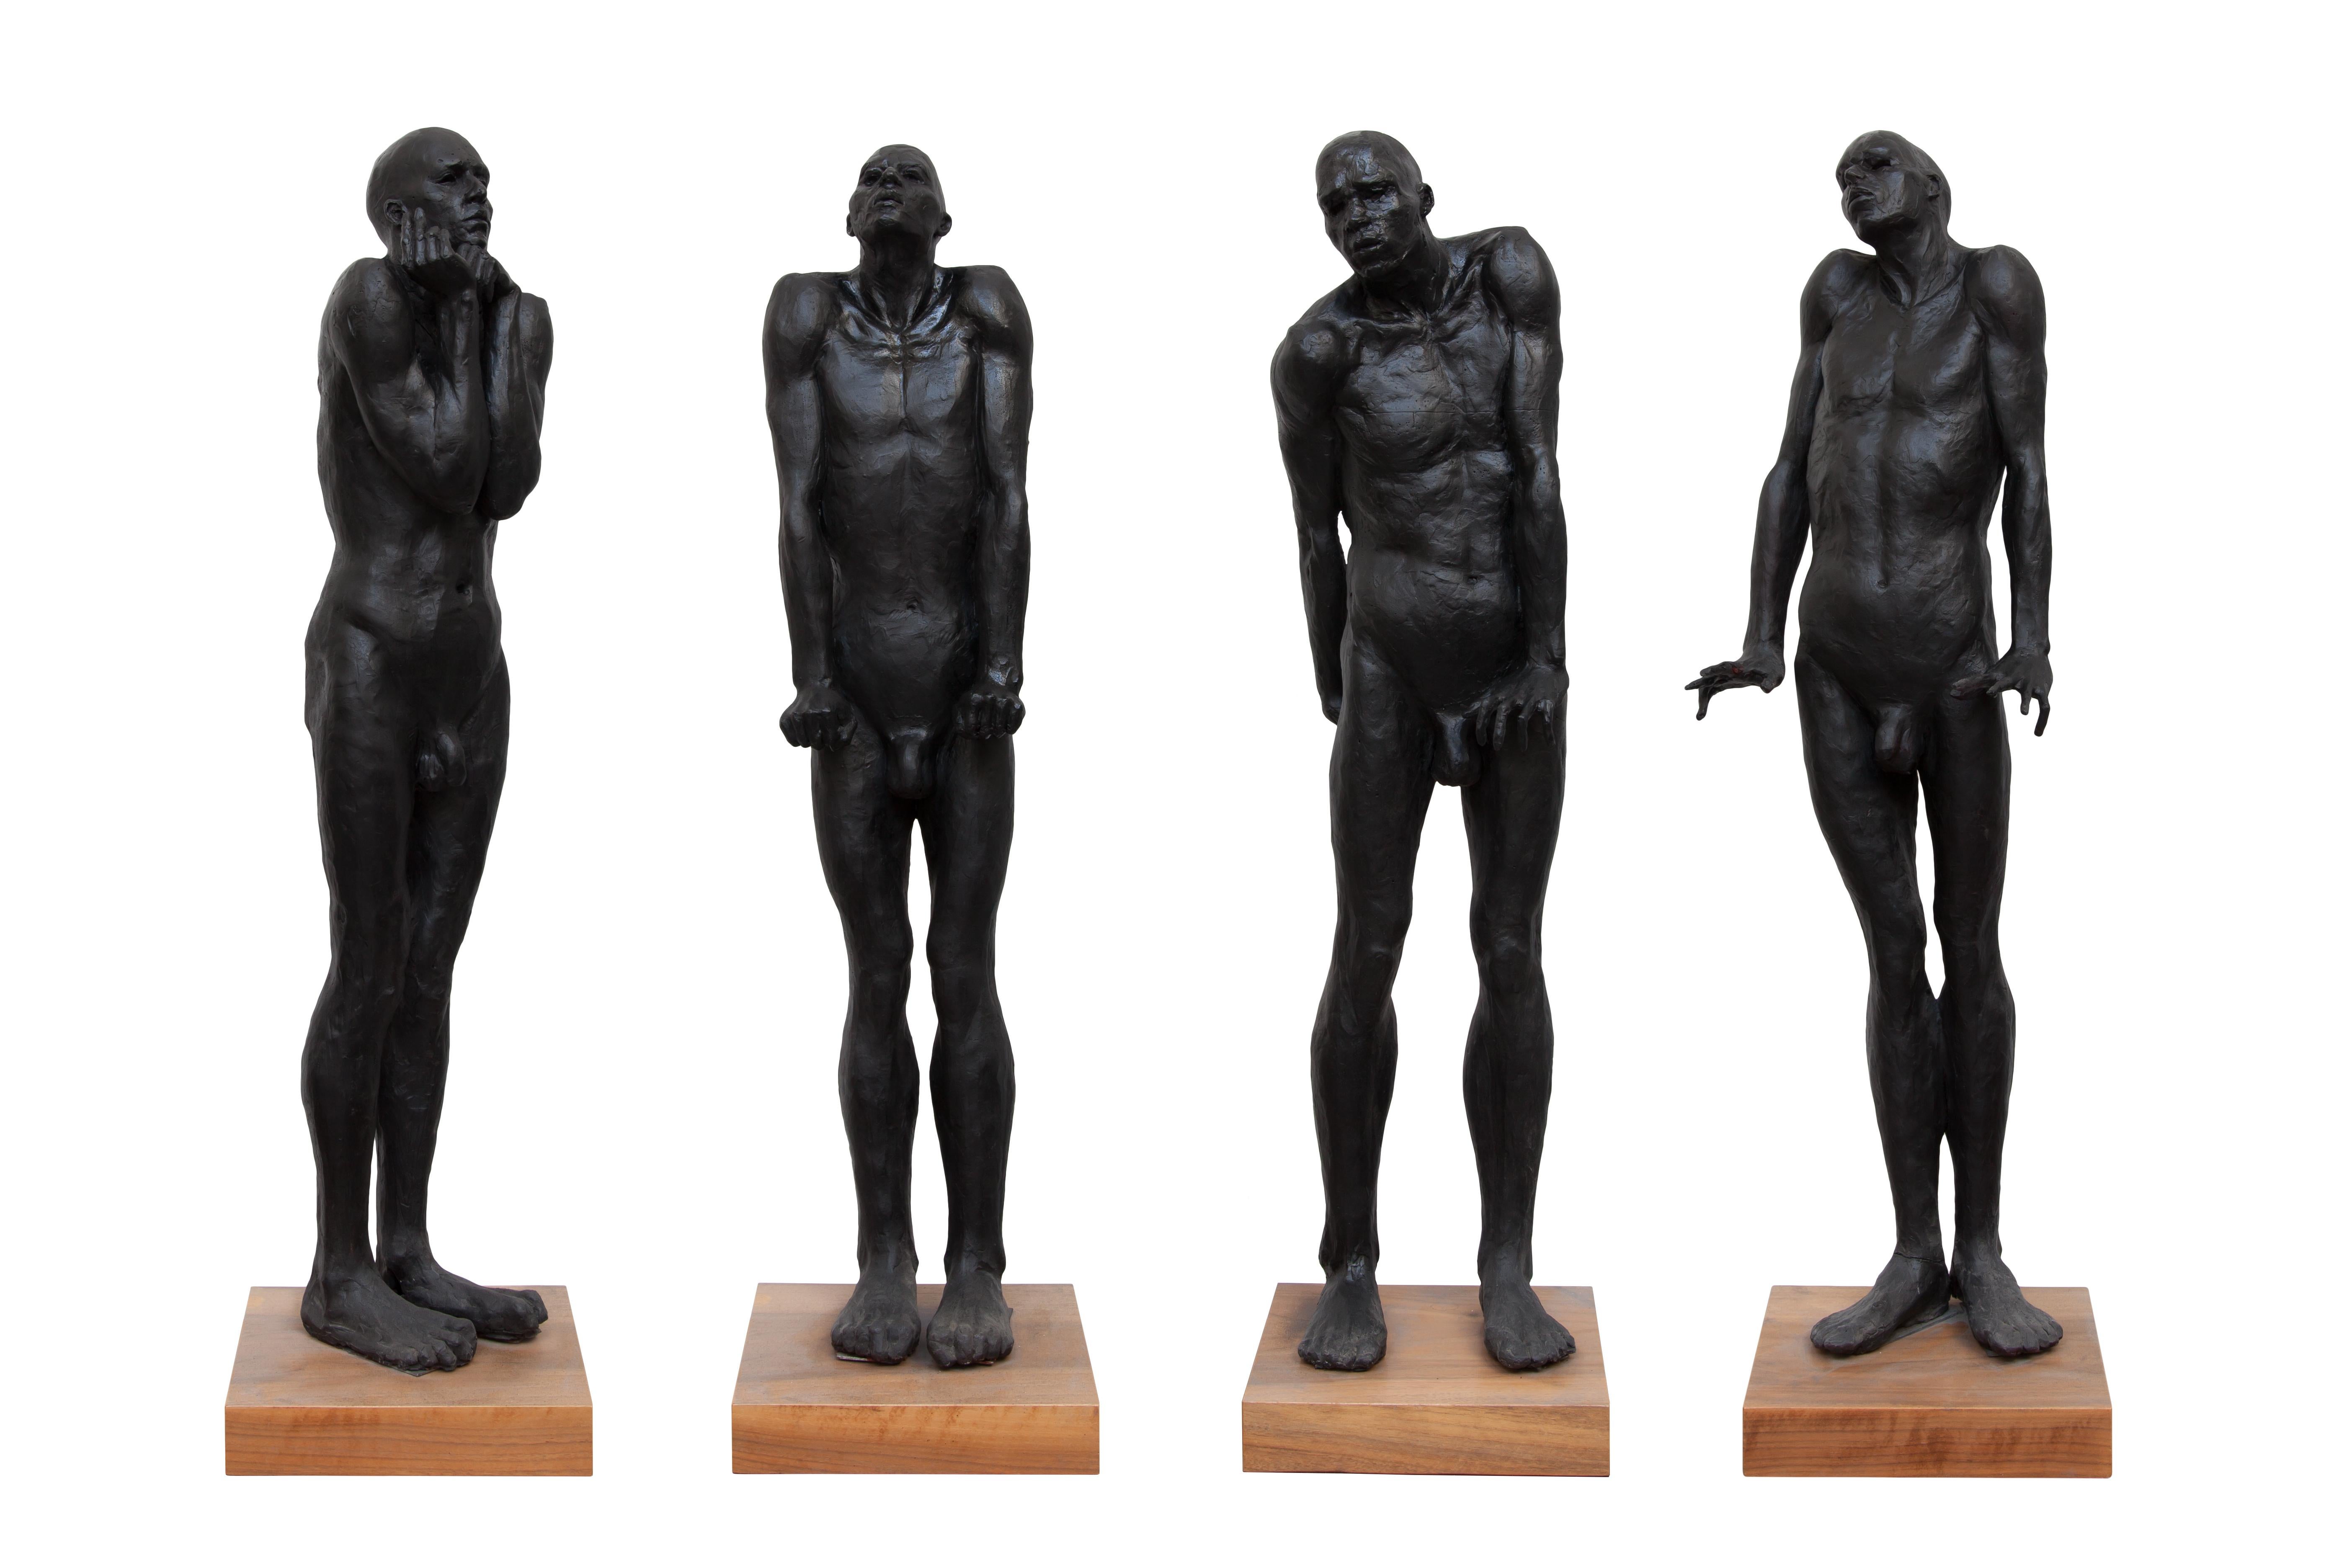 Seven Million and Counting (Sculpture 6) - Contemporary bronze sculpture - Brown Figurative Sculpture by Guy Haddon Grant